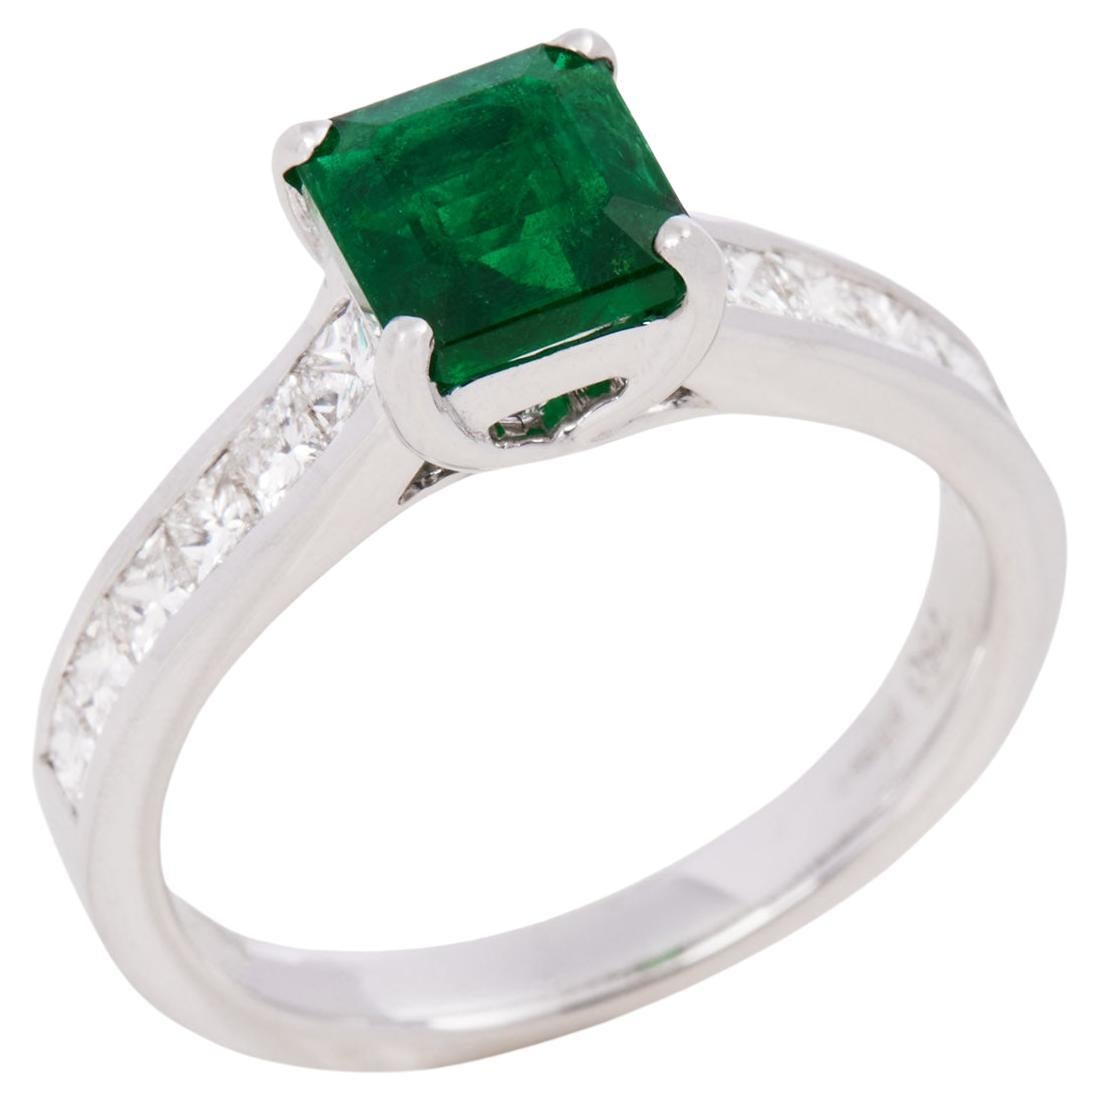 David Jerome Certified 1.15ct Square Cut Emerald and Diamond Ring For Sale